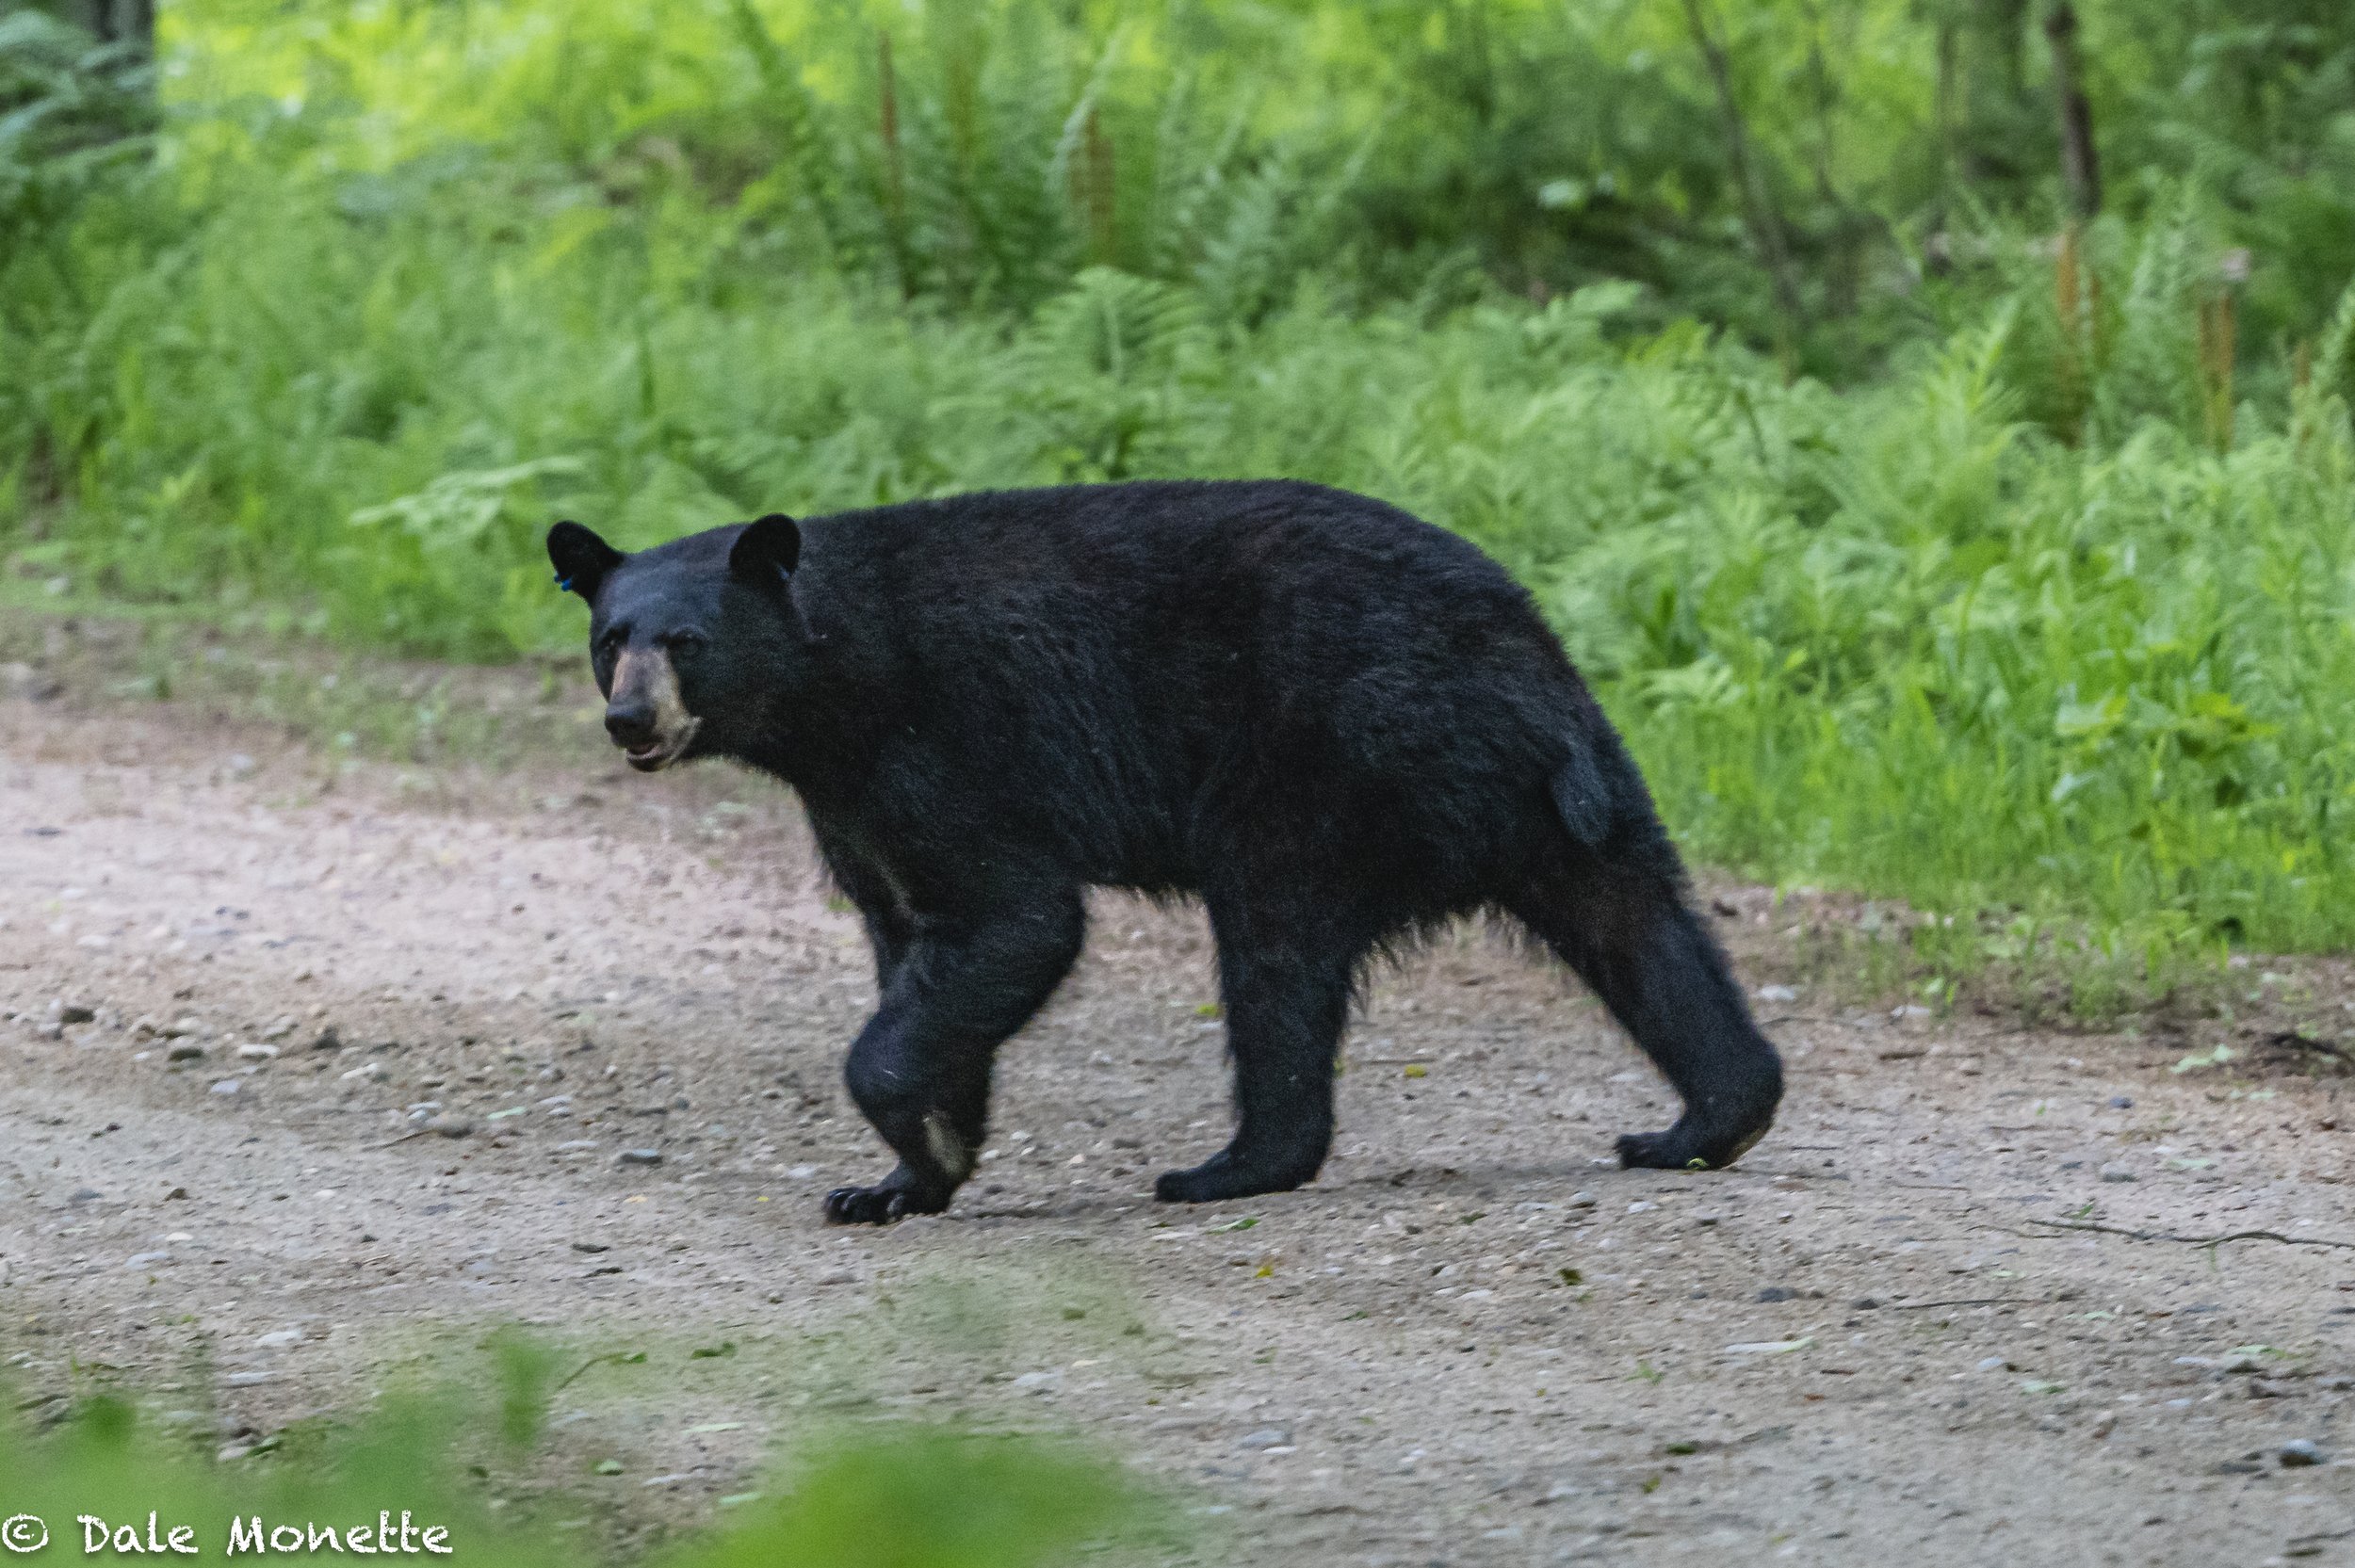   Another black bear appeared in the middle of the road…. he was on a mission!    